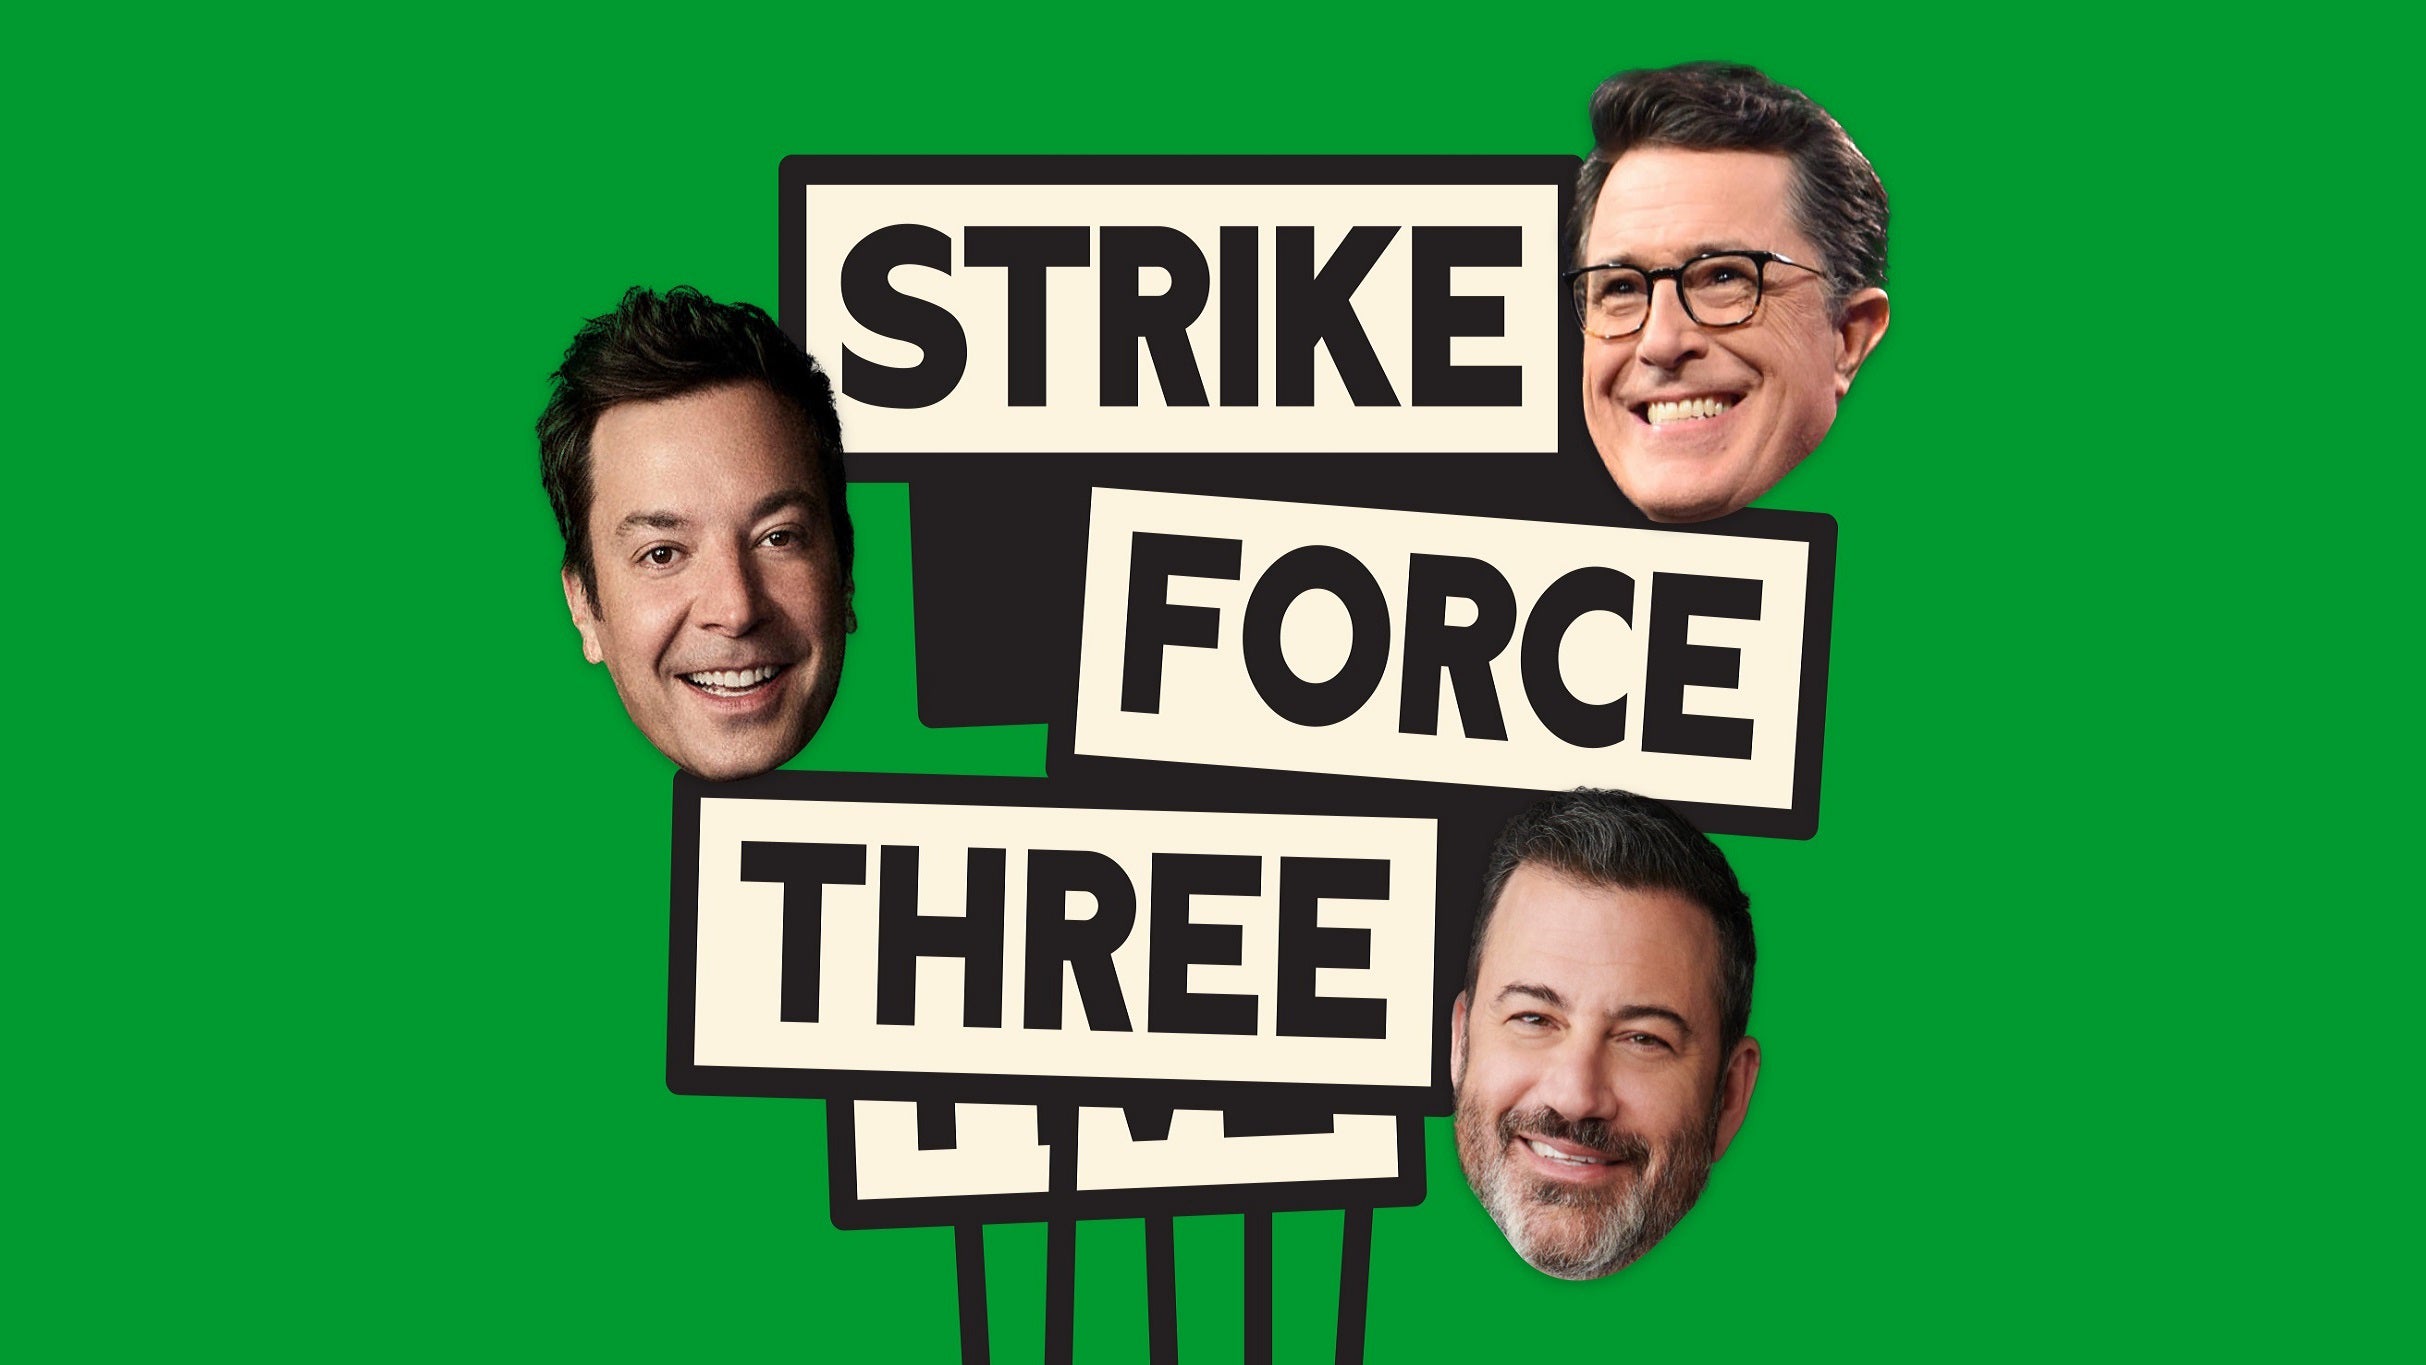 Stephen Colbert, Jimmy Fallon and Jimmy Kimmel: LIVE! One Night Only! in Las Vegas promo photo for Live Nation presale offer code